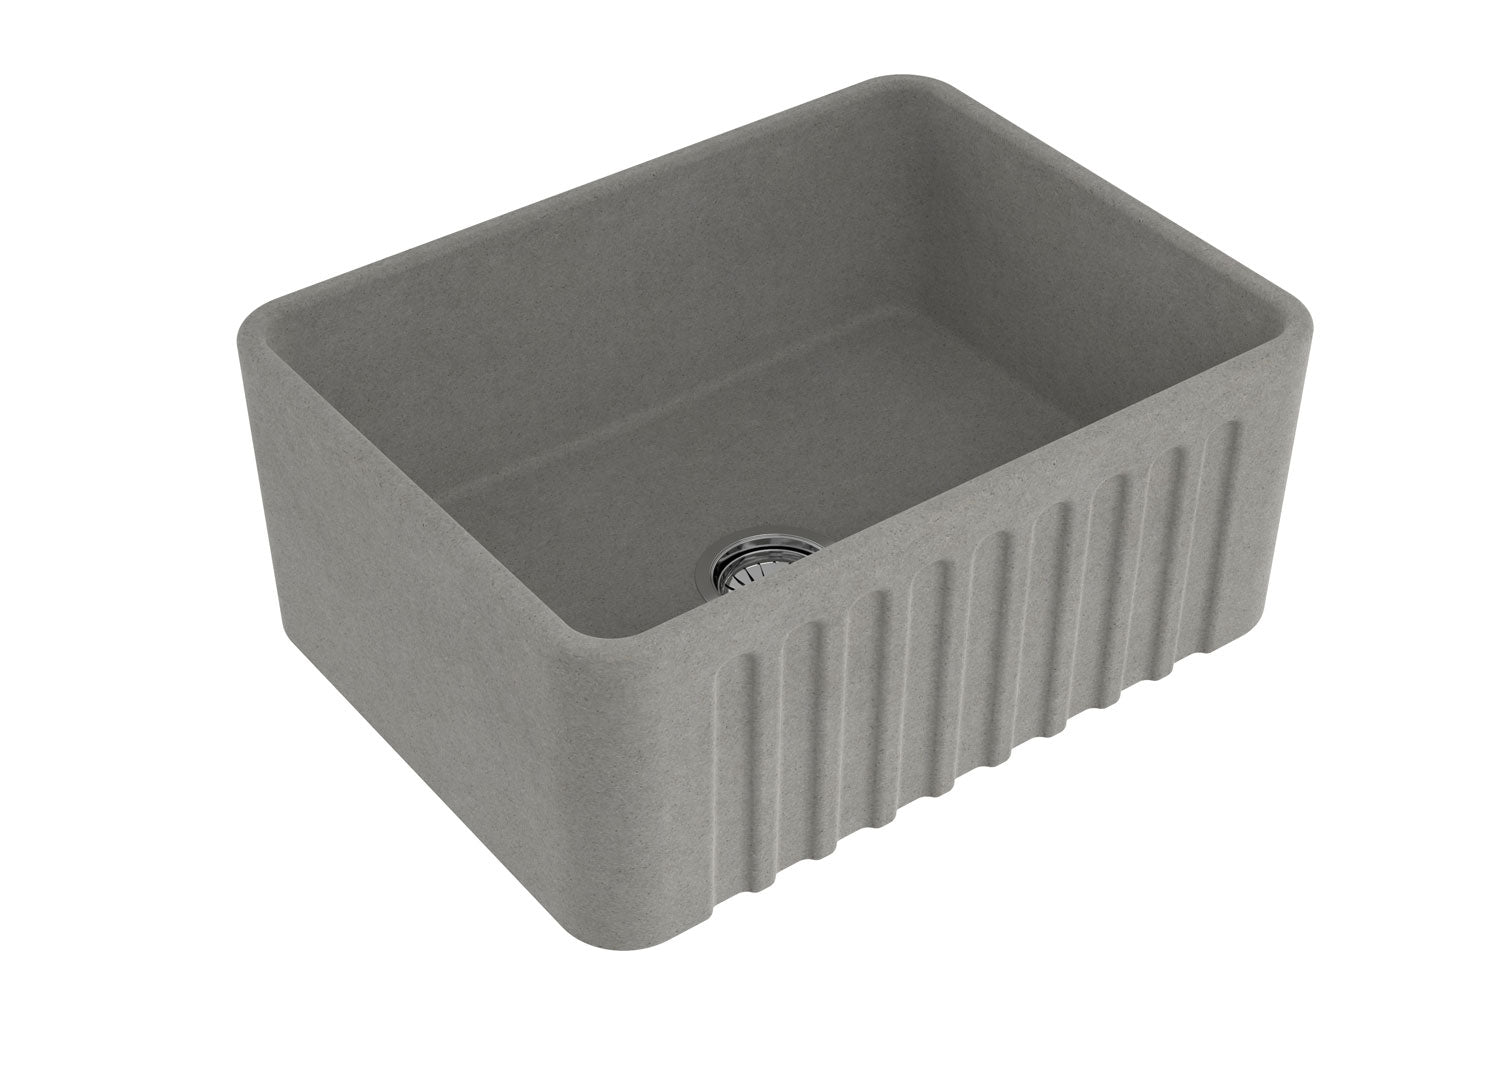 TURNER HASTINGS NOVI RIBBED FARMHOUSE BUTLER SINK WITH OVERFLOW CONCRETE LOOK 600MM